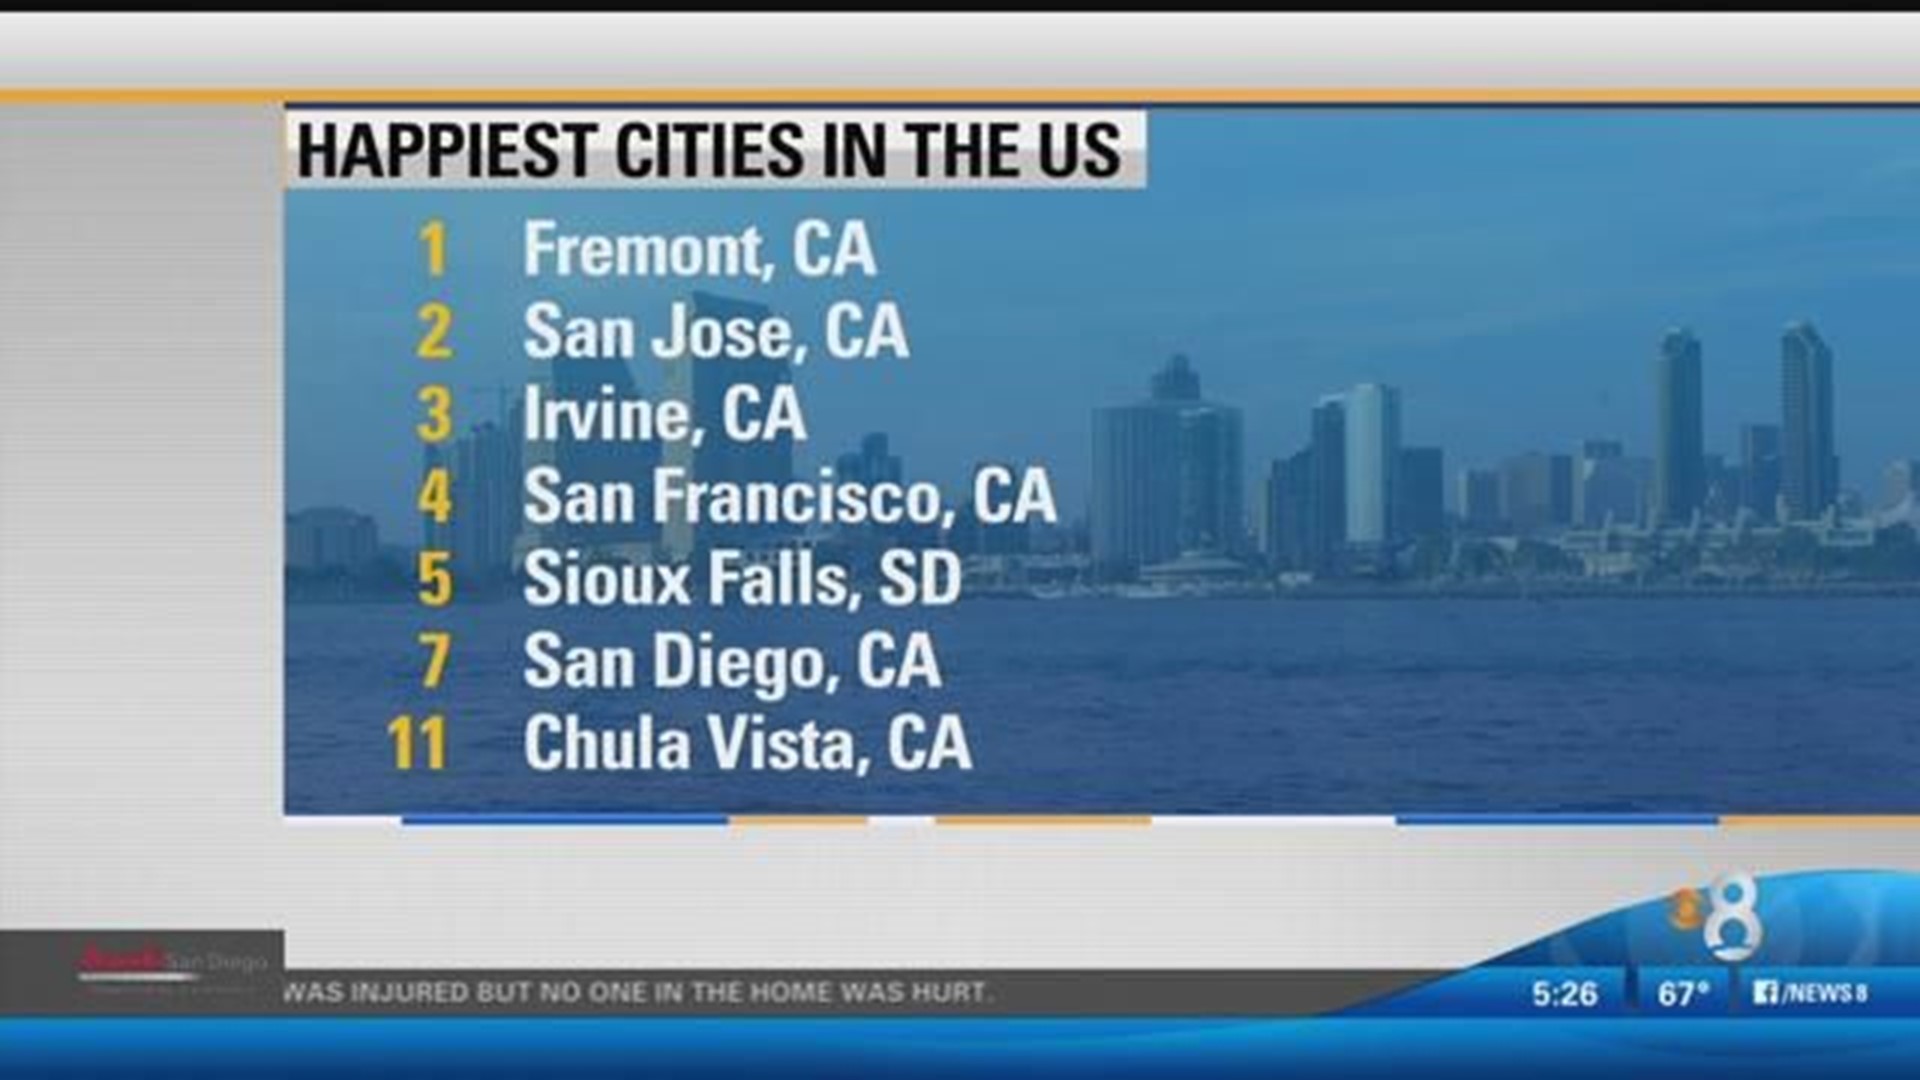 San Diego and Chula Vista among top happiest cities in the U.S.